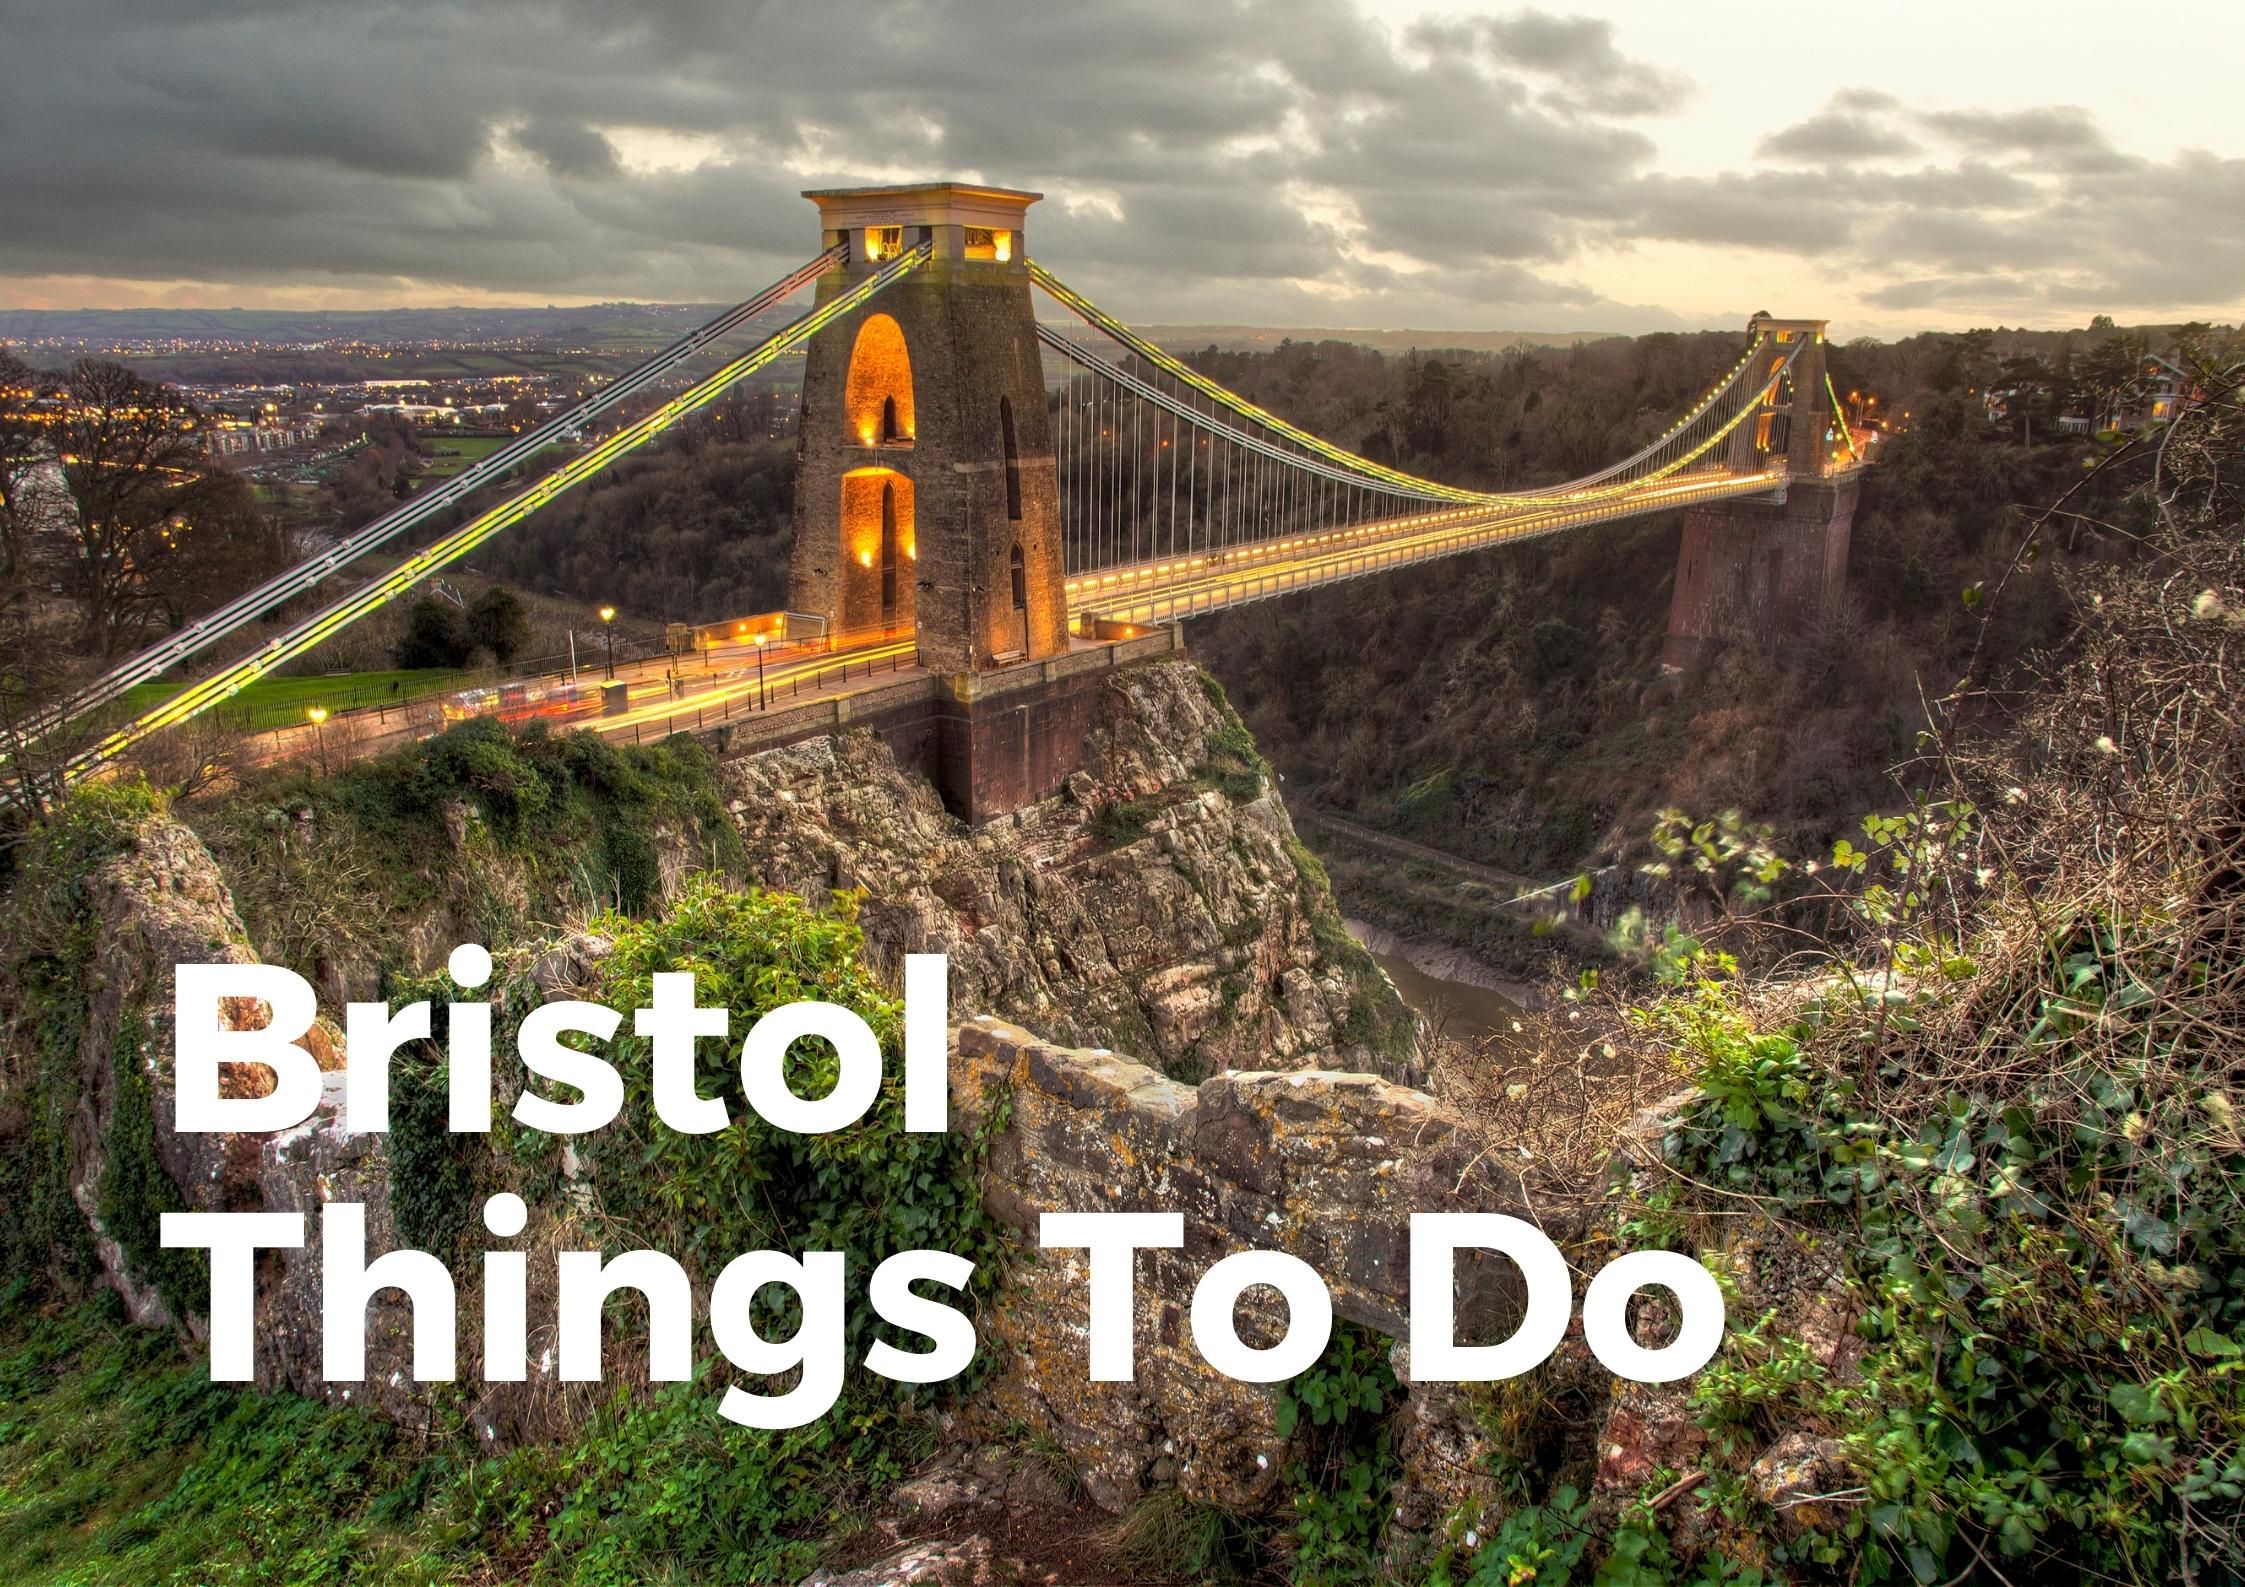 Things to do in Bristol